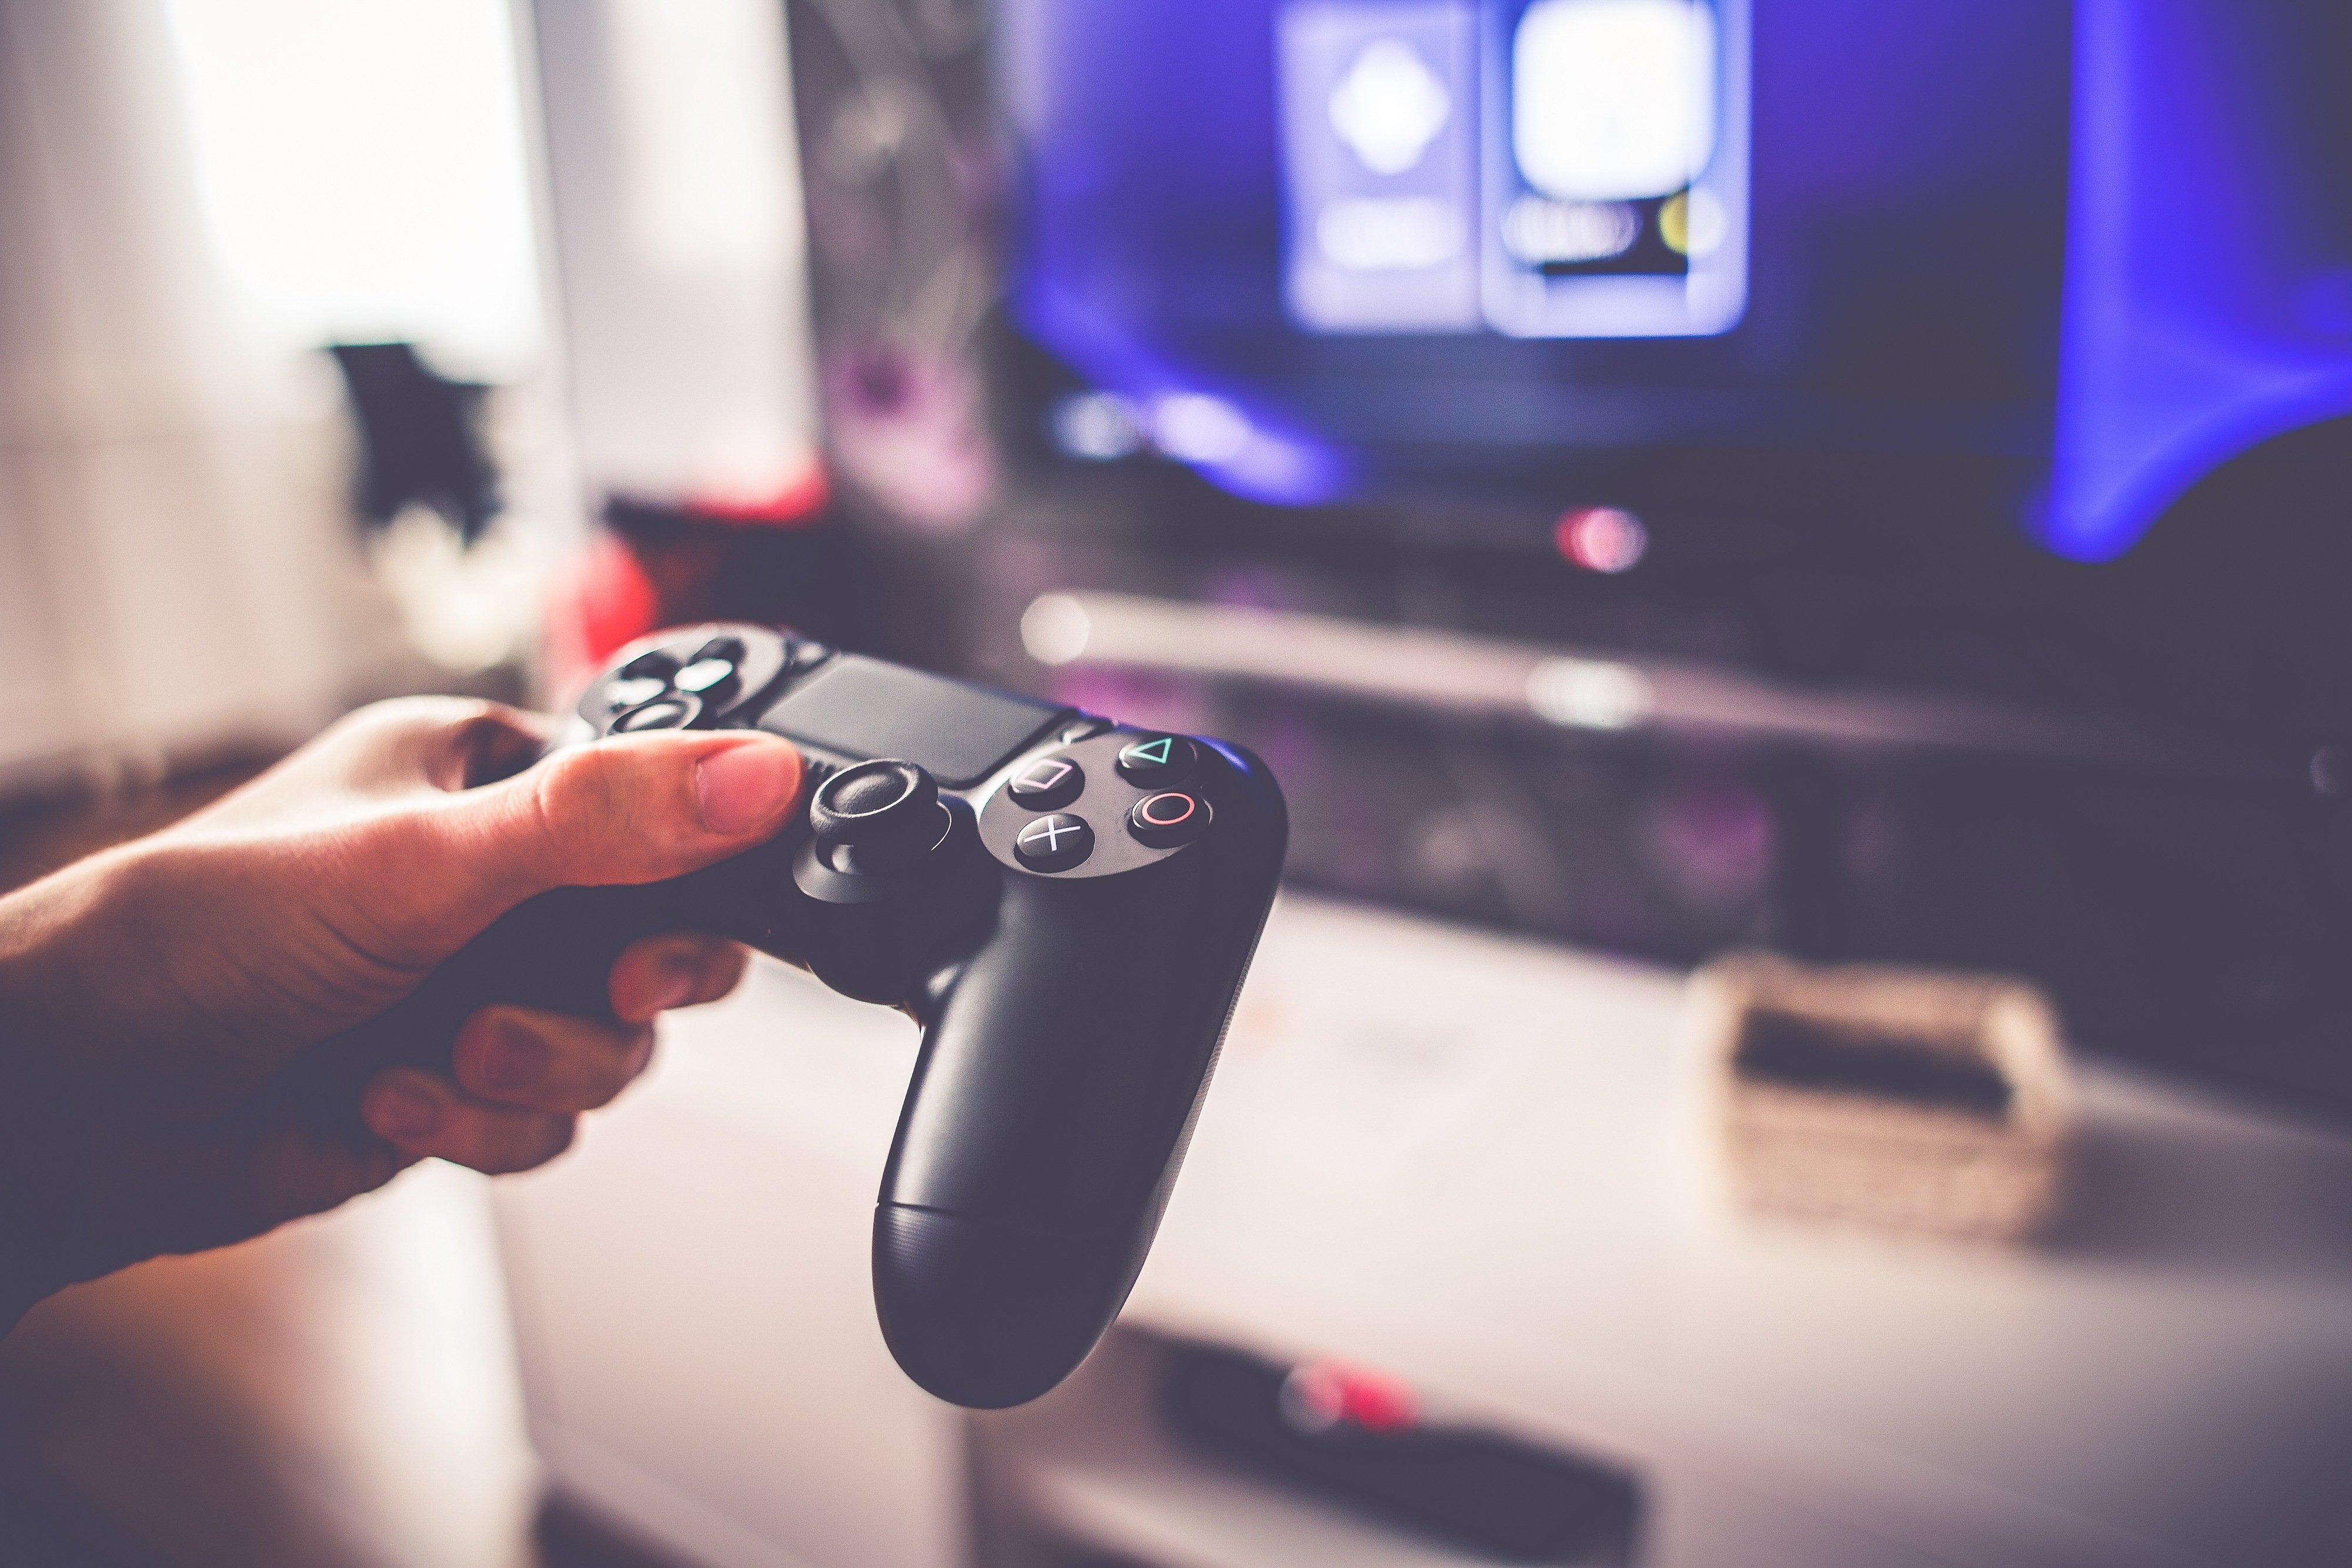 Playing Video Games Benefits Mental Health: Scientists 